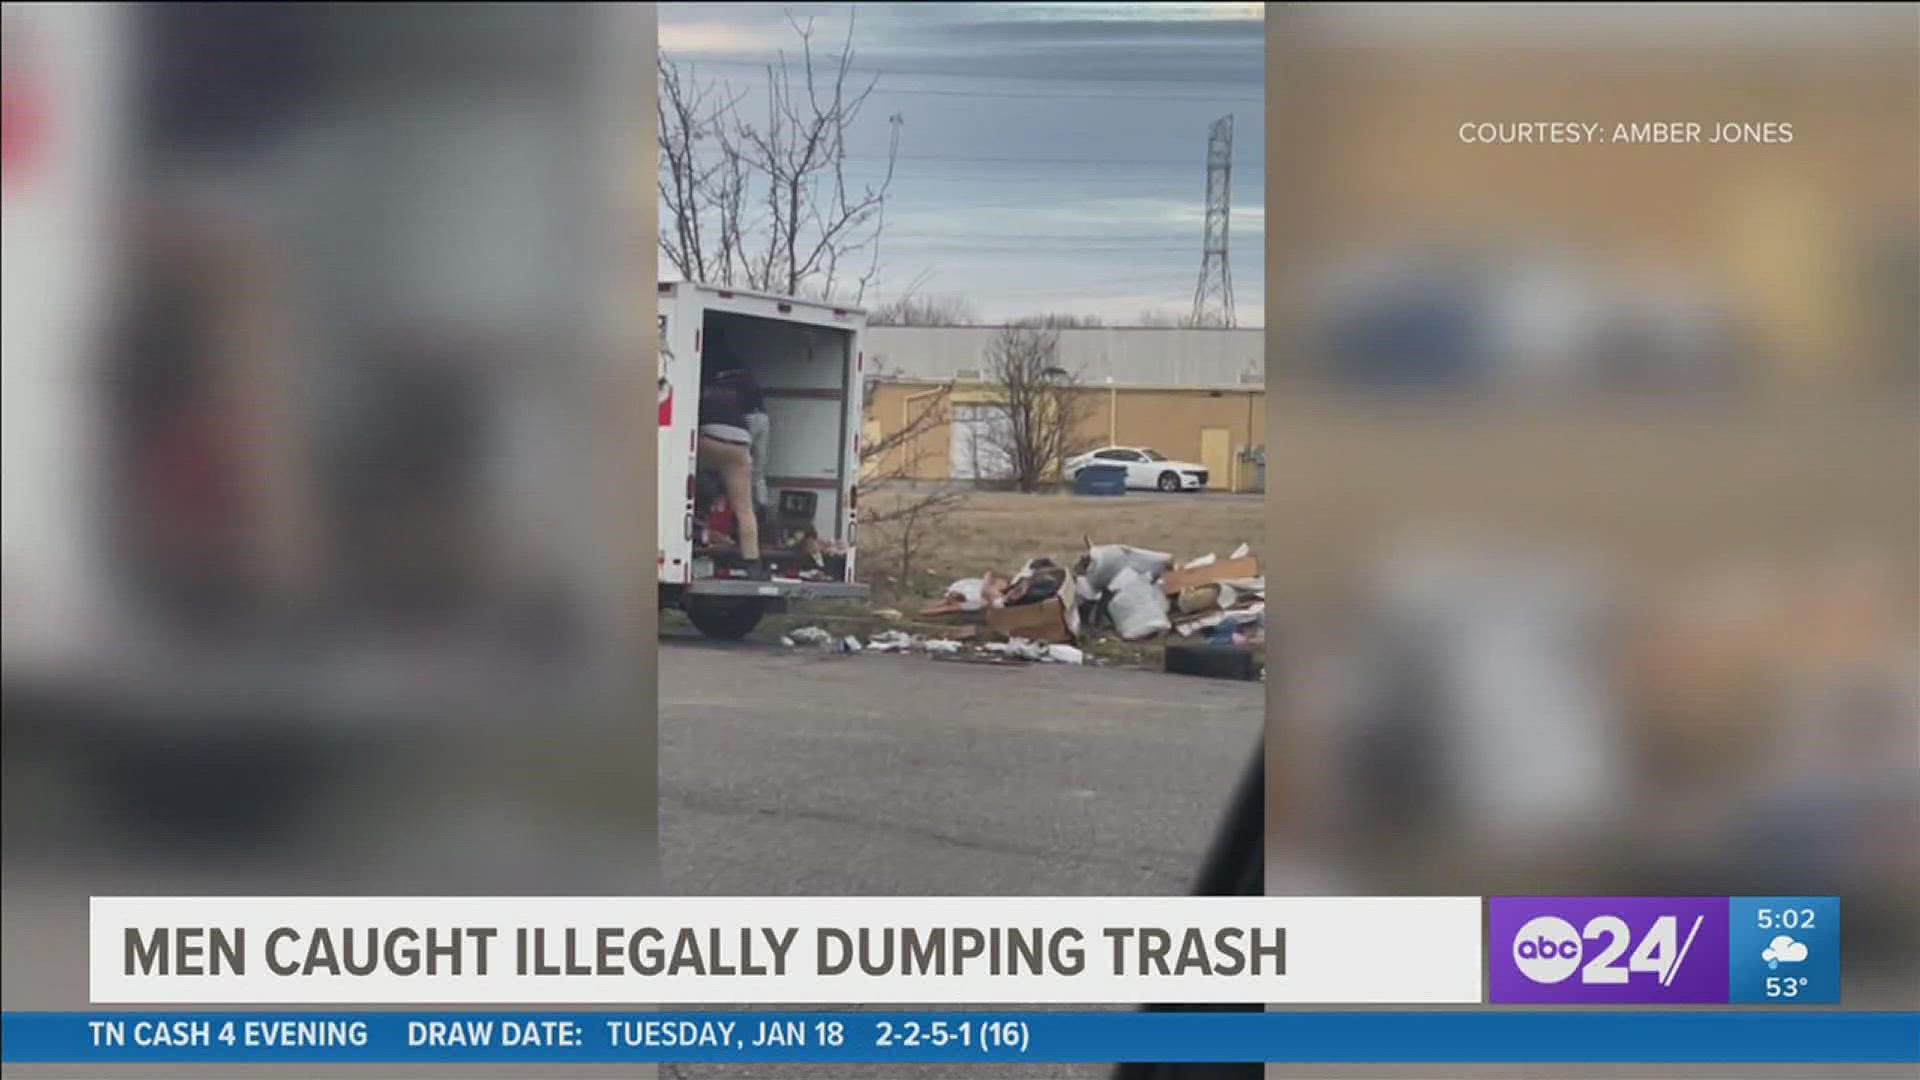 Illegal dumping acts, like this one caught on camera, is an issue too familiar for Memphians.